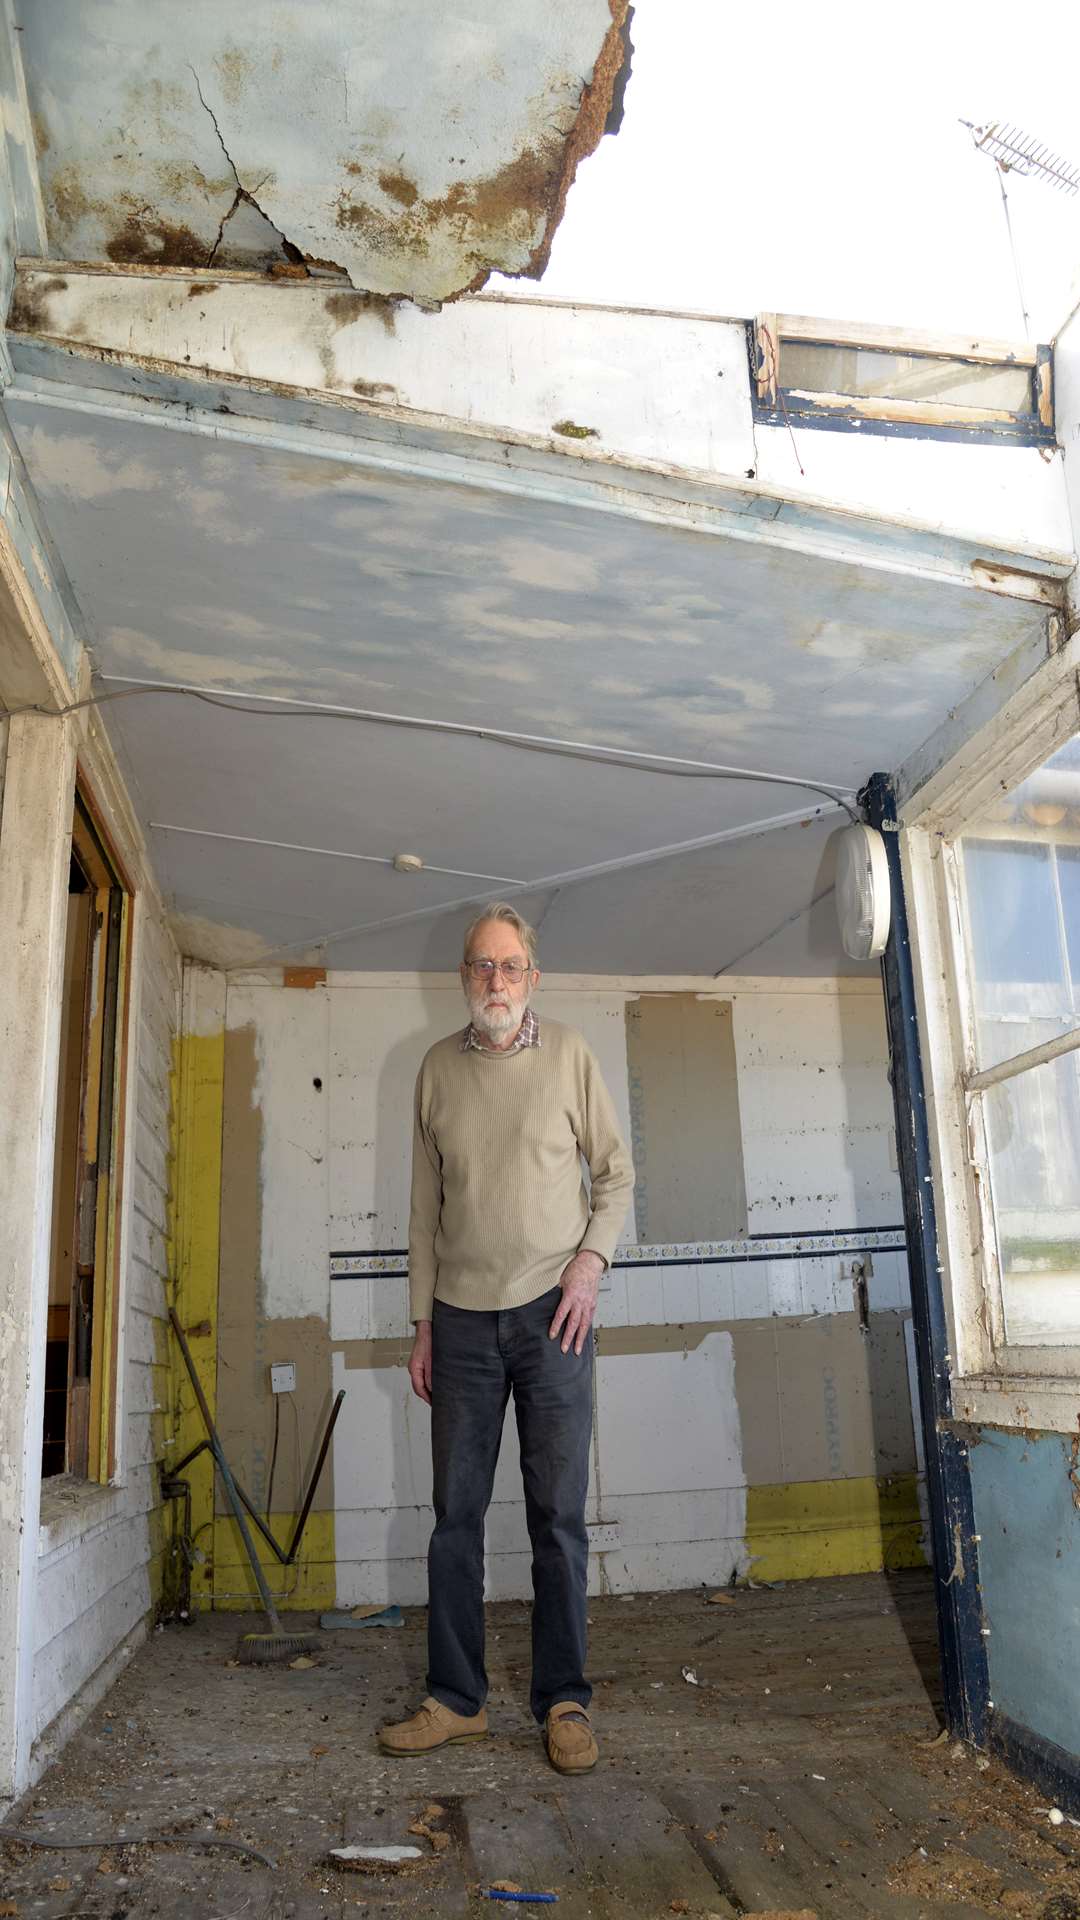 Mr Bensted is refusing to sell up - despite the condition of the home